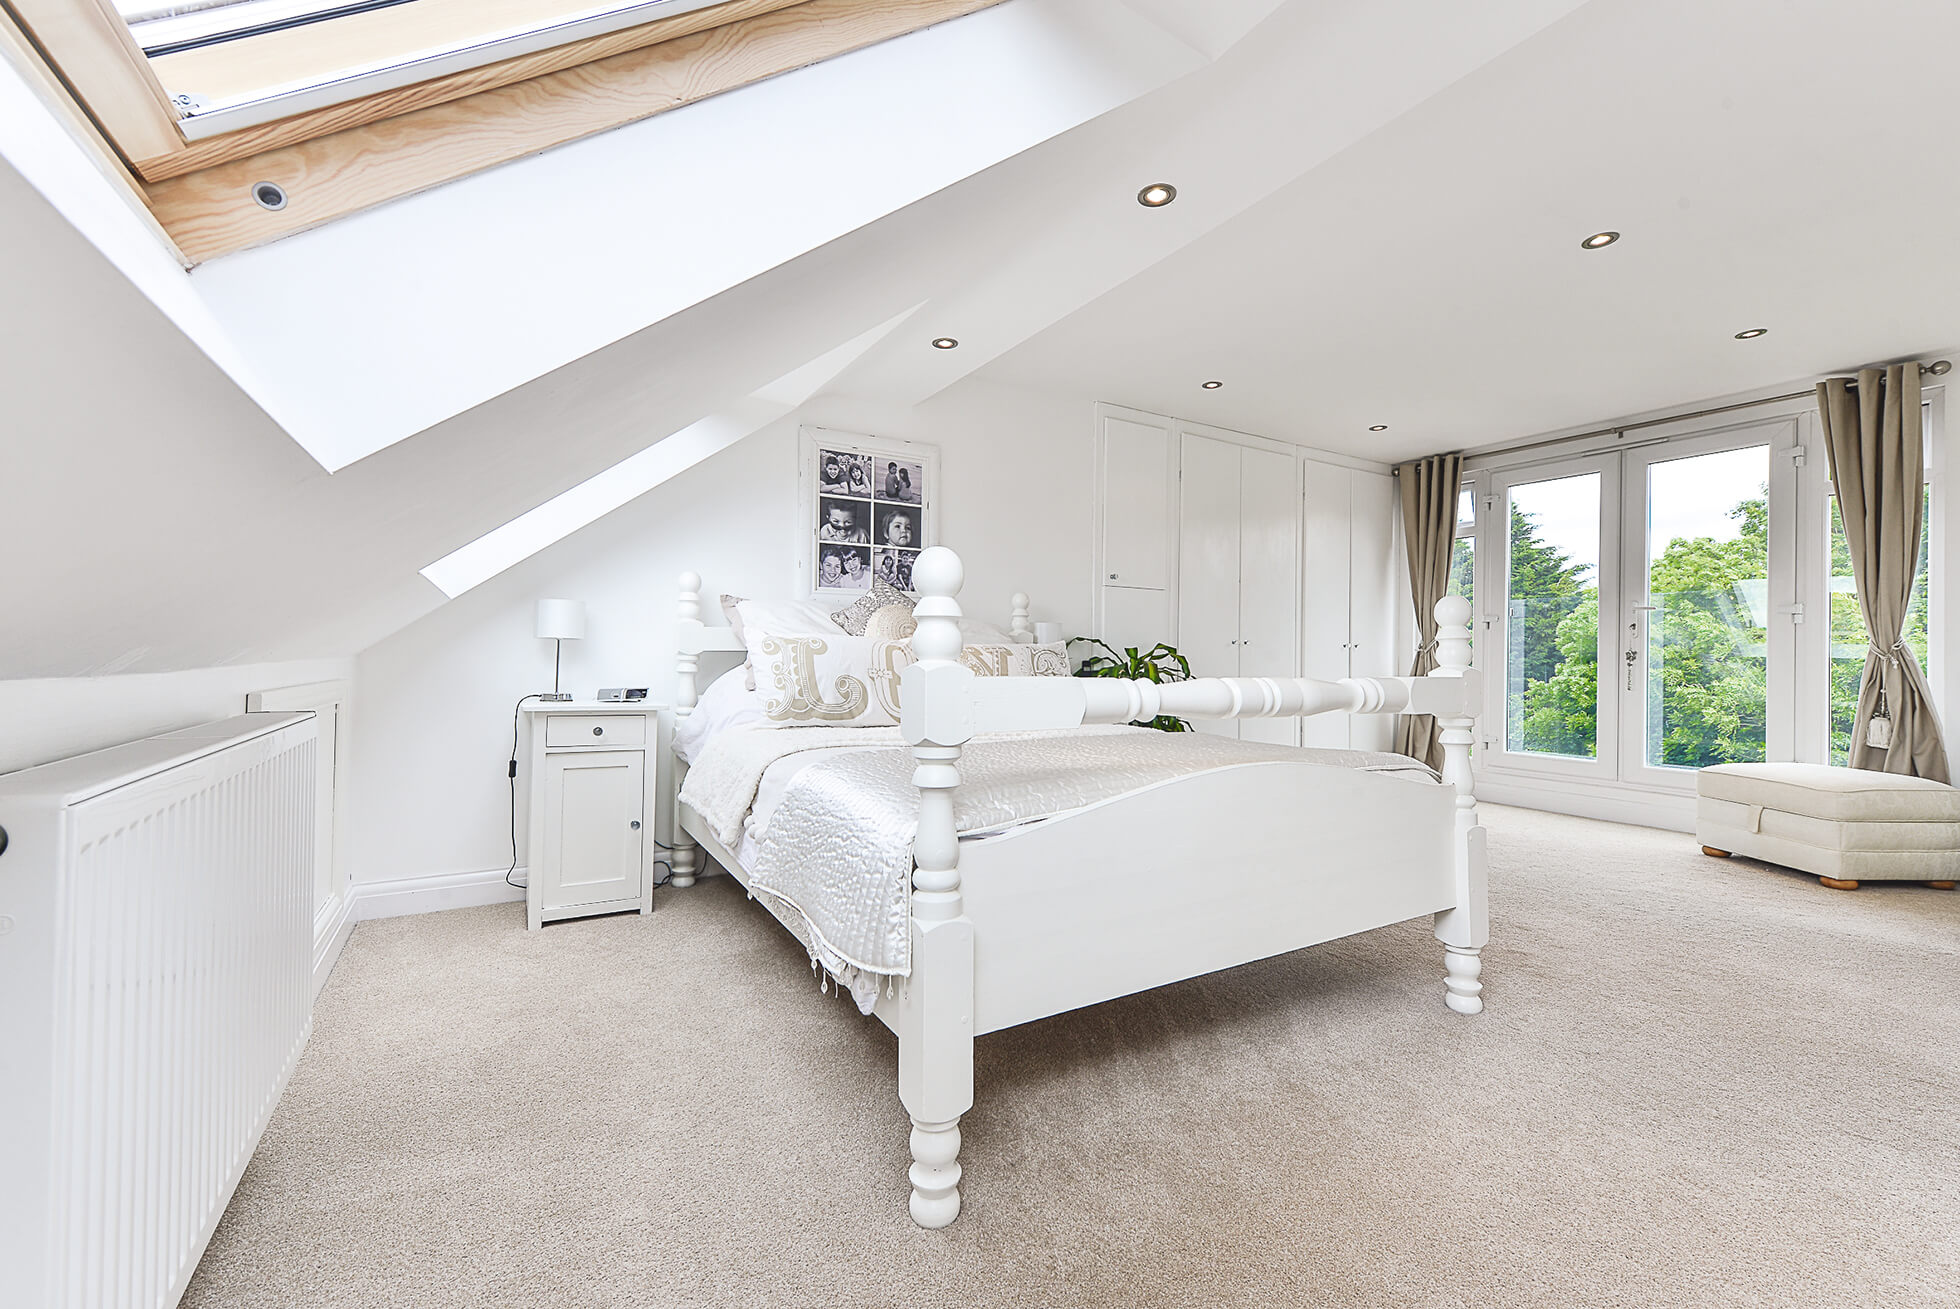 Do you have a question about converting your Loft in Norton? Here are the most popular questions asked by our clients.